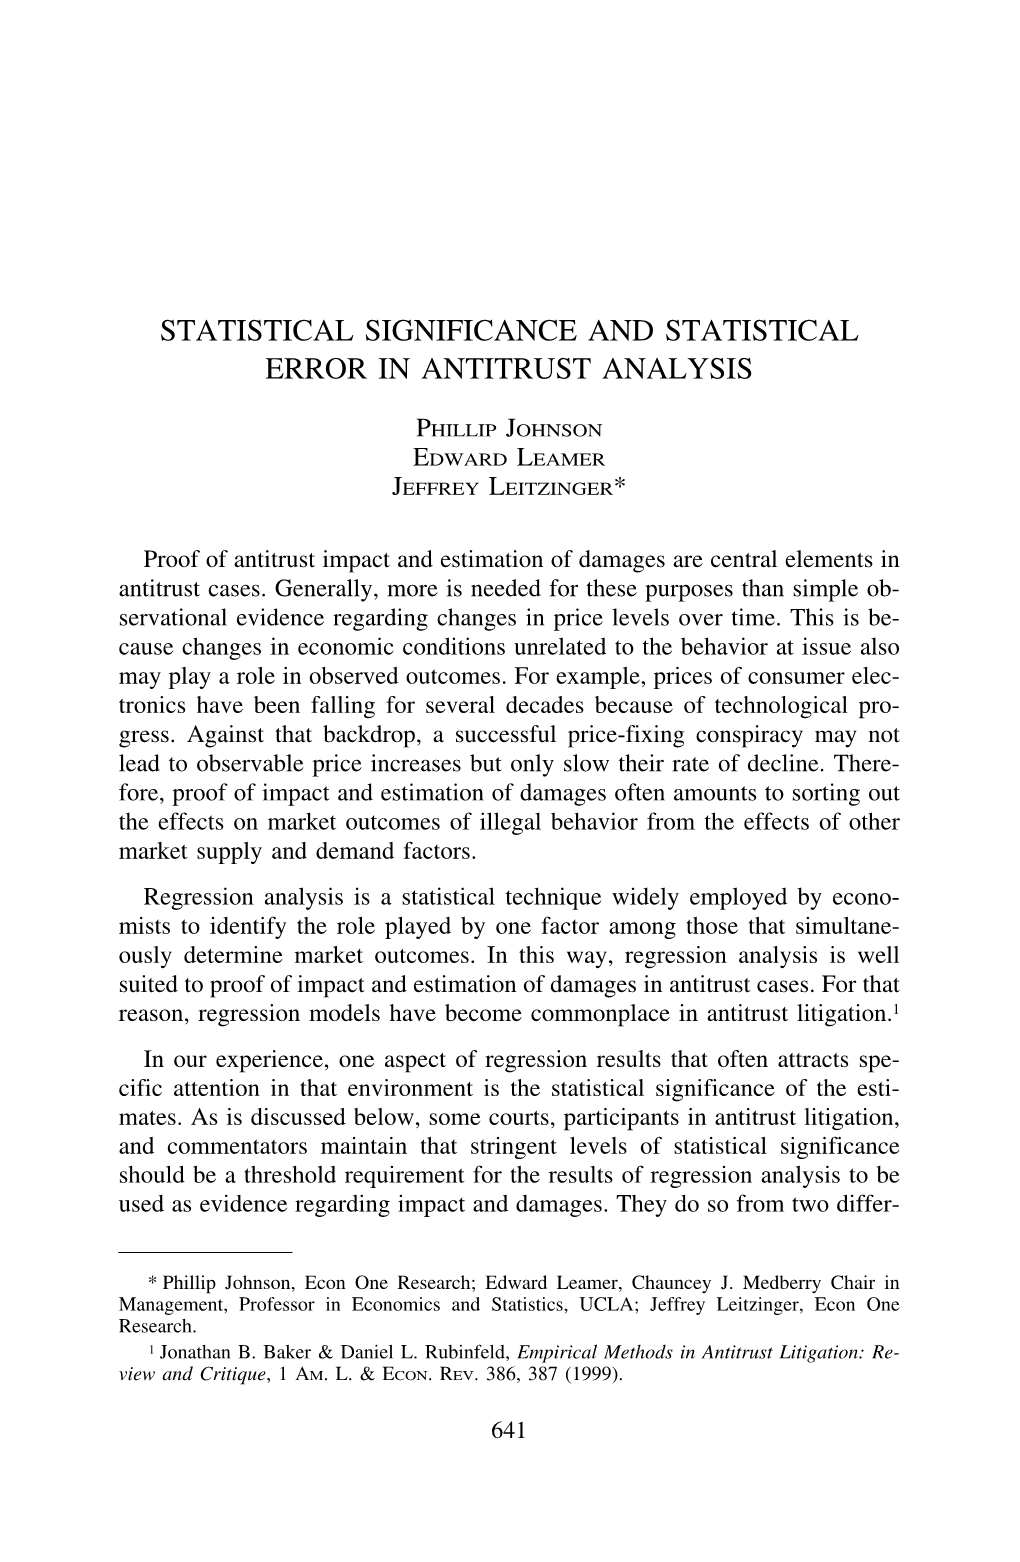 Statistical Significance and Statistical Error in Antitrust Analysis